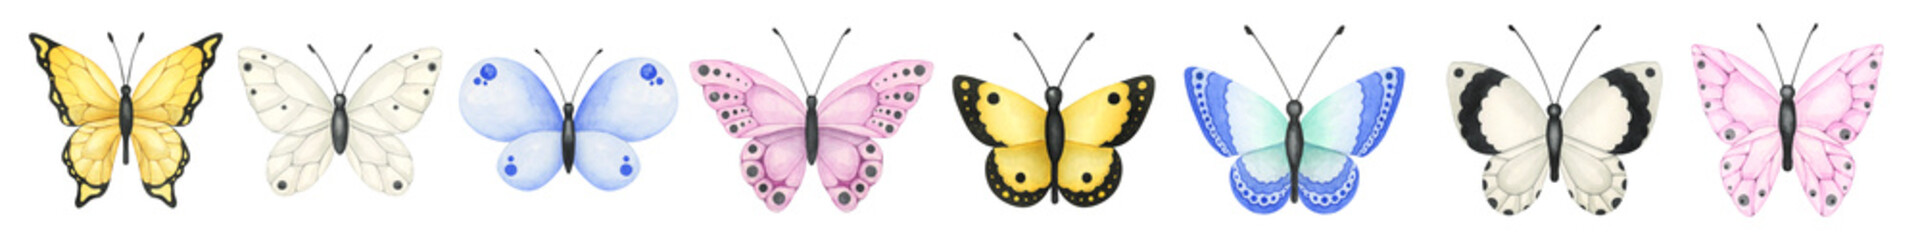 Collection of beautiful watercolor butterflies. Delicate insect illustrations isolated illustration on white background